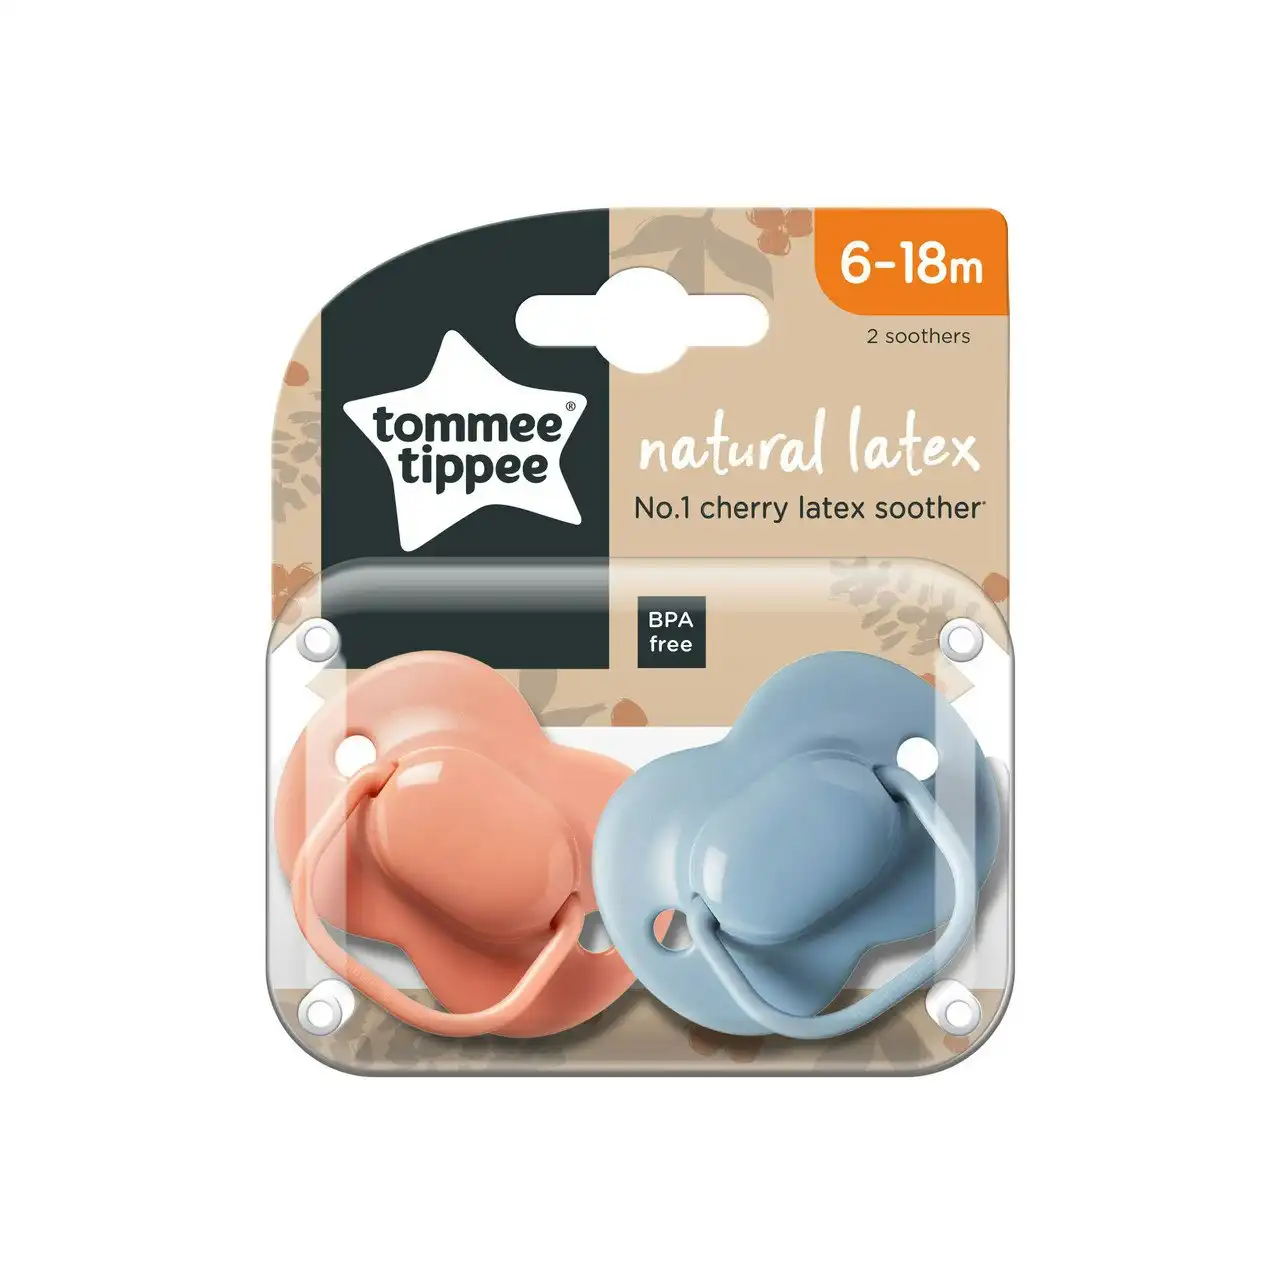 Tommee Tippee Cherry Latex Soother, 6-18 months, pack of 2 soothers with 100% natural latex baglet